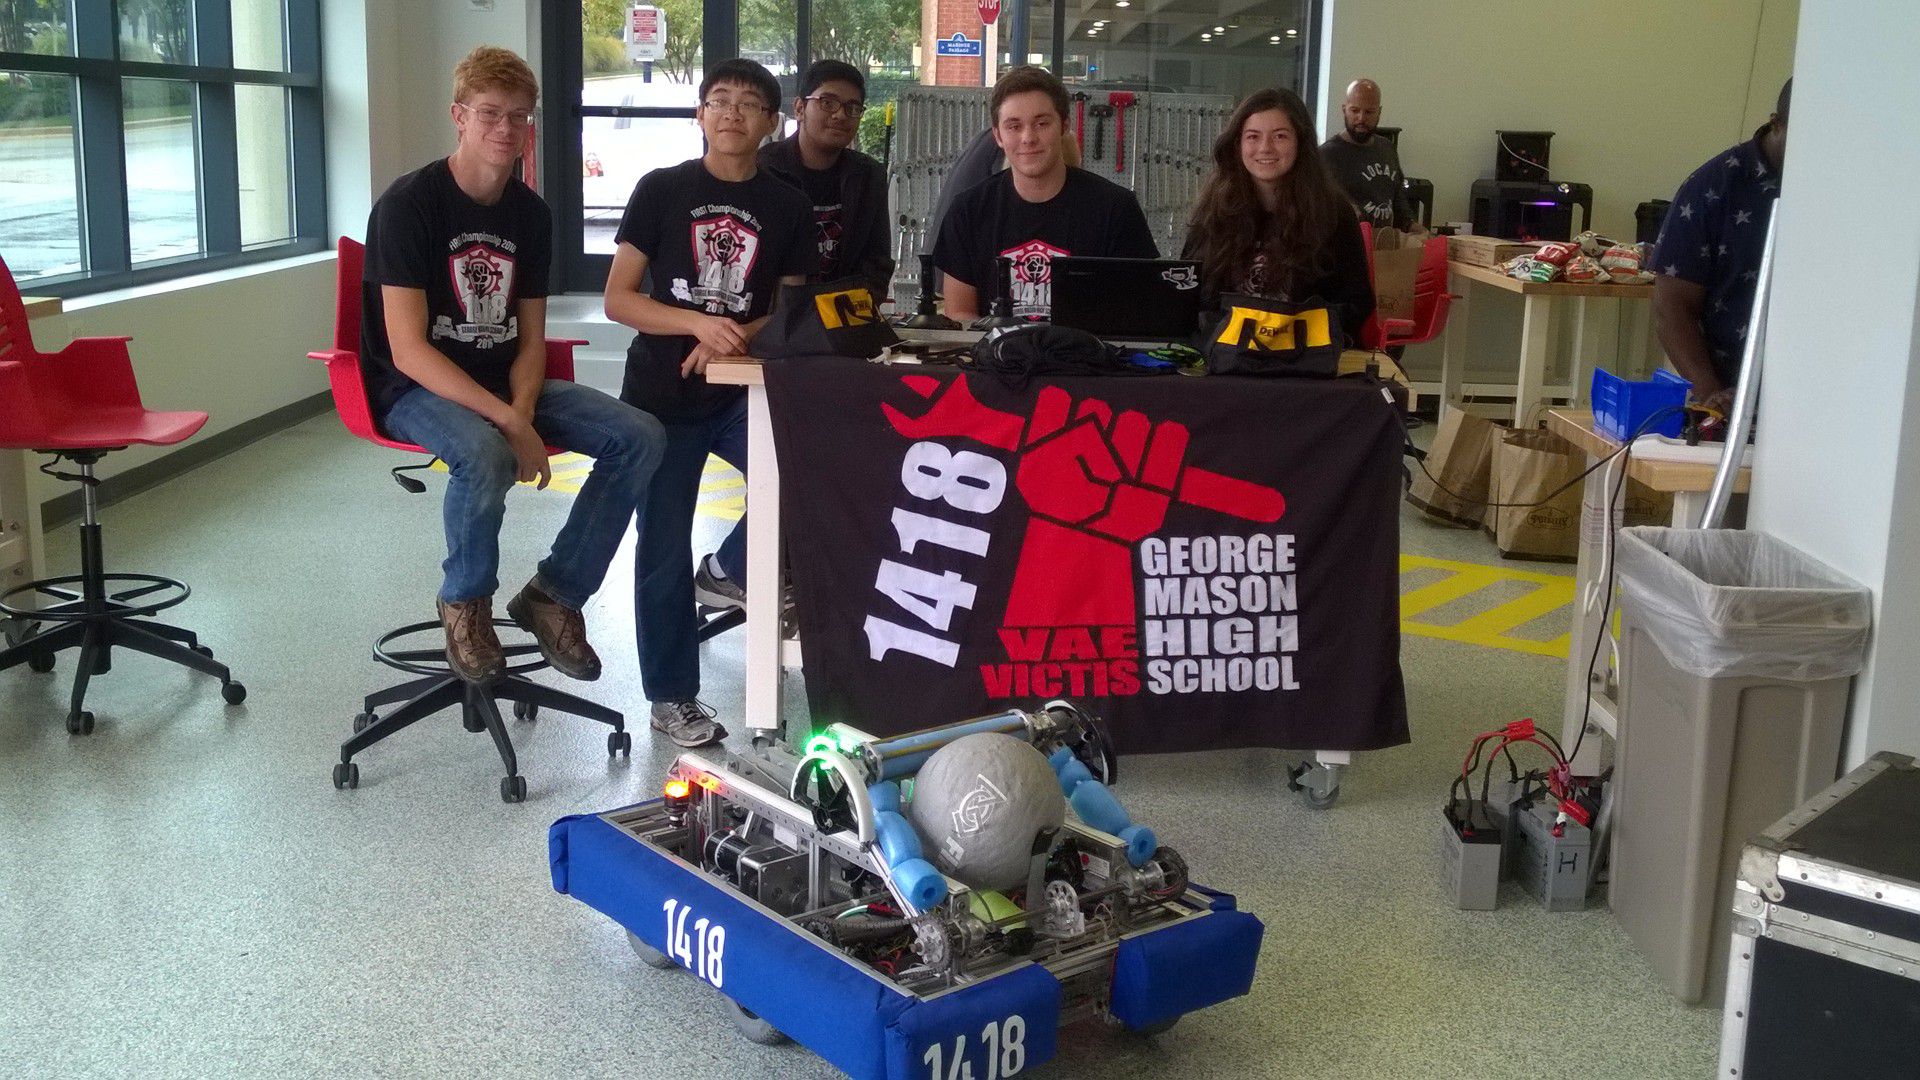 The team posing behind a 1418 banner with the robot in front.